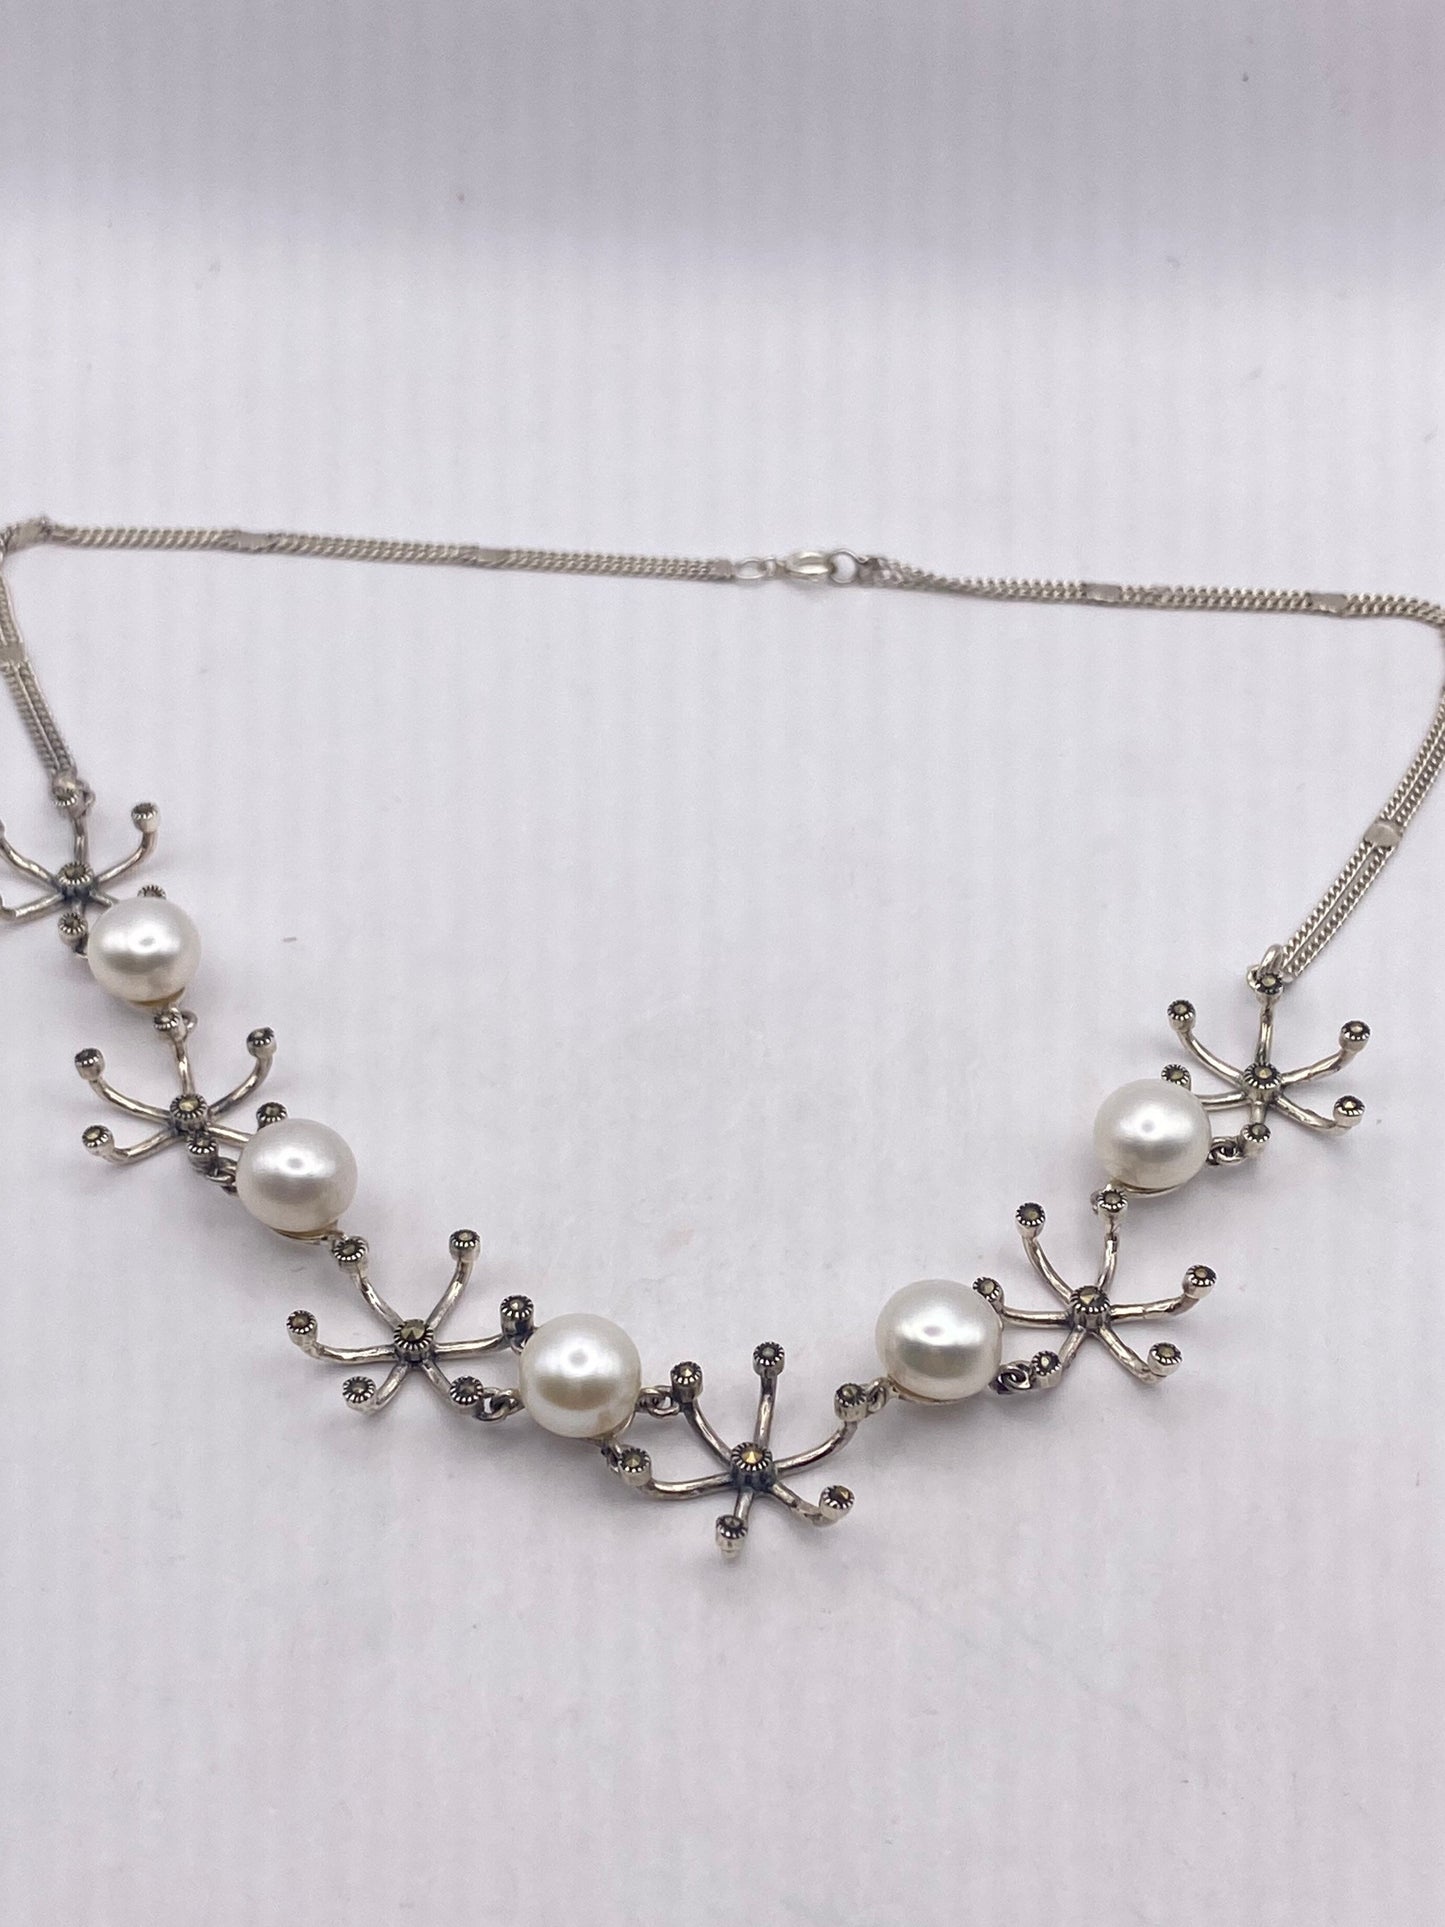 Vintage Pearl 925 Sterling Silver Marcasite Necklace Choker